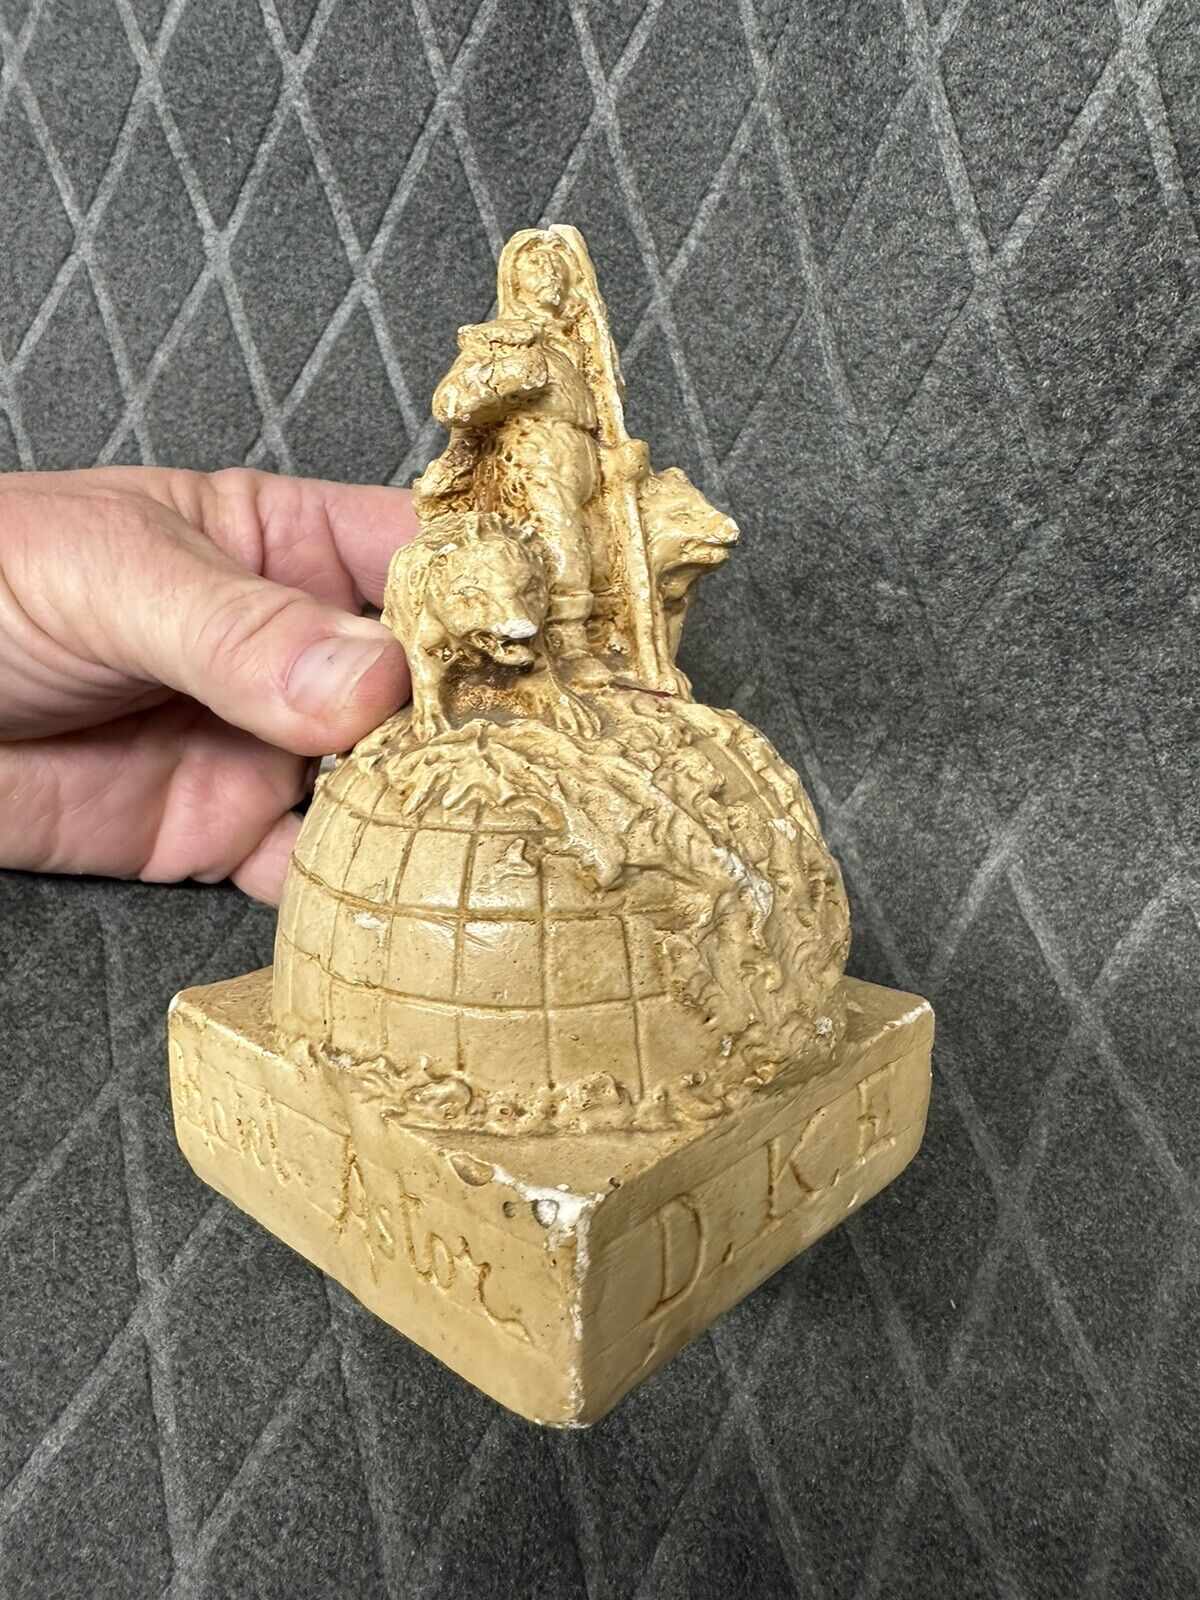 1909 antique Hotel Astor NY Robert Peary Dinner North Pole Explorer Sculpture